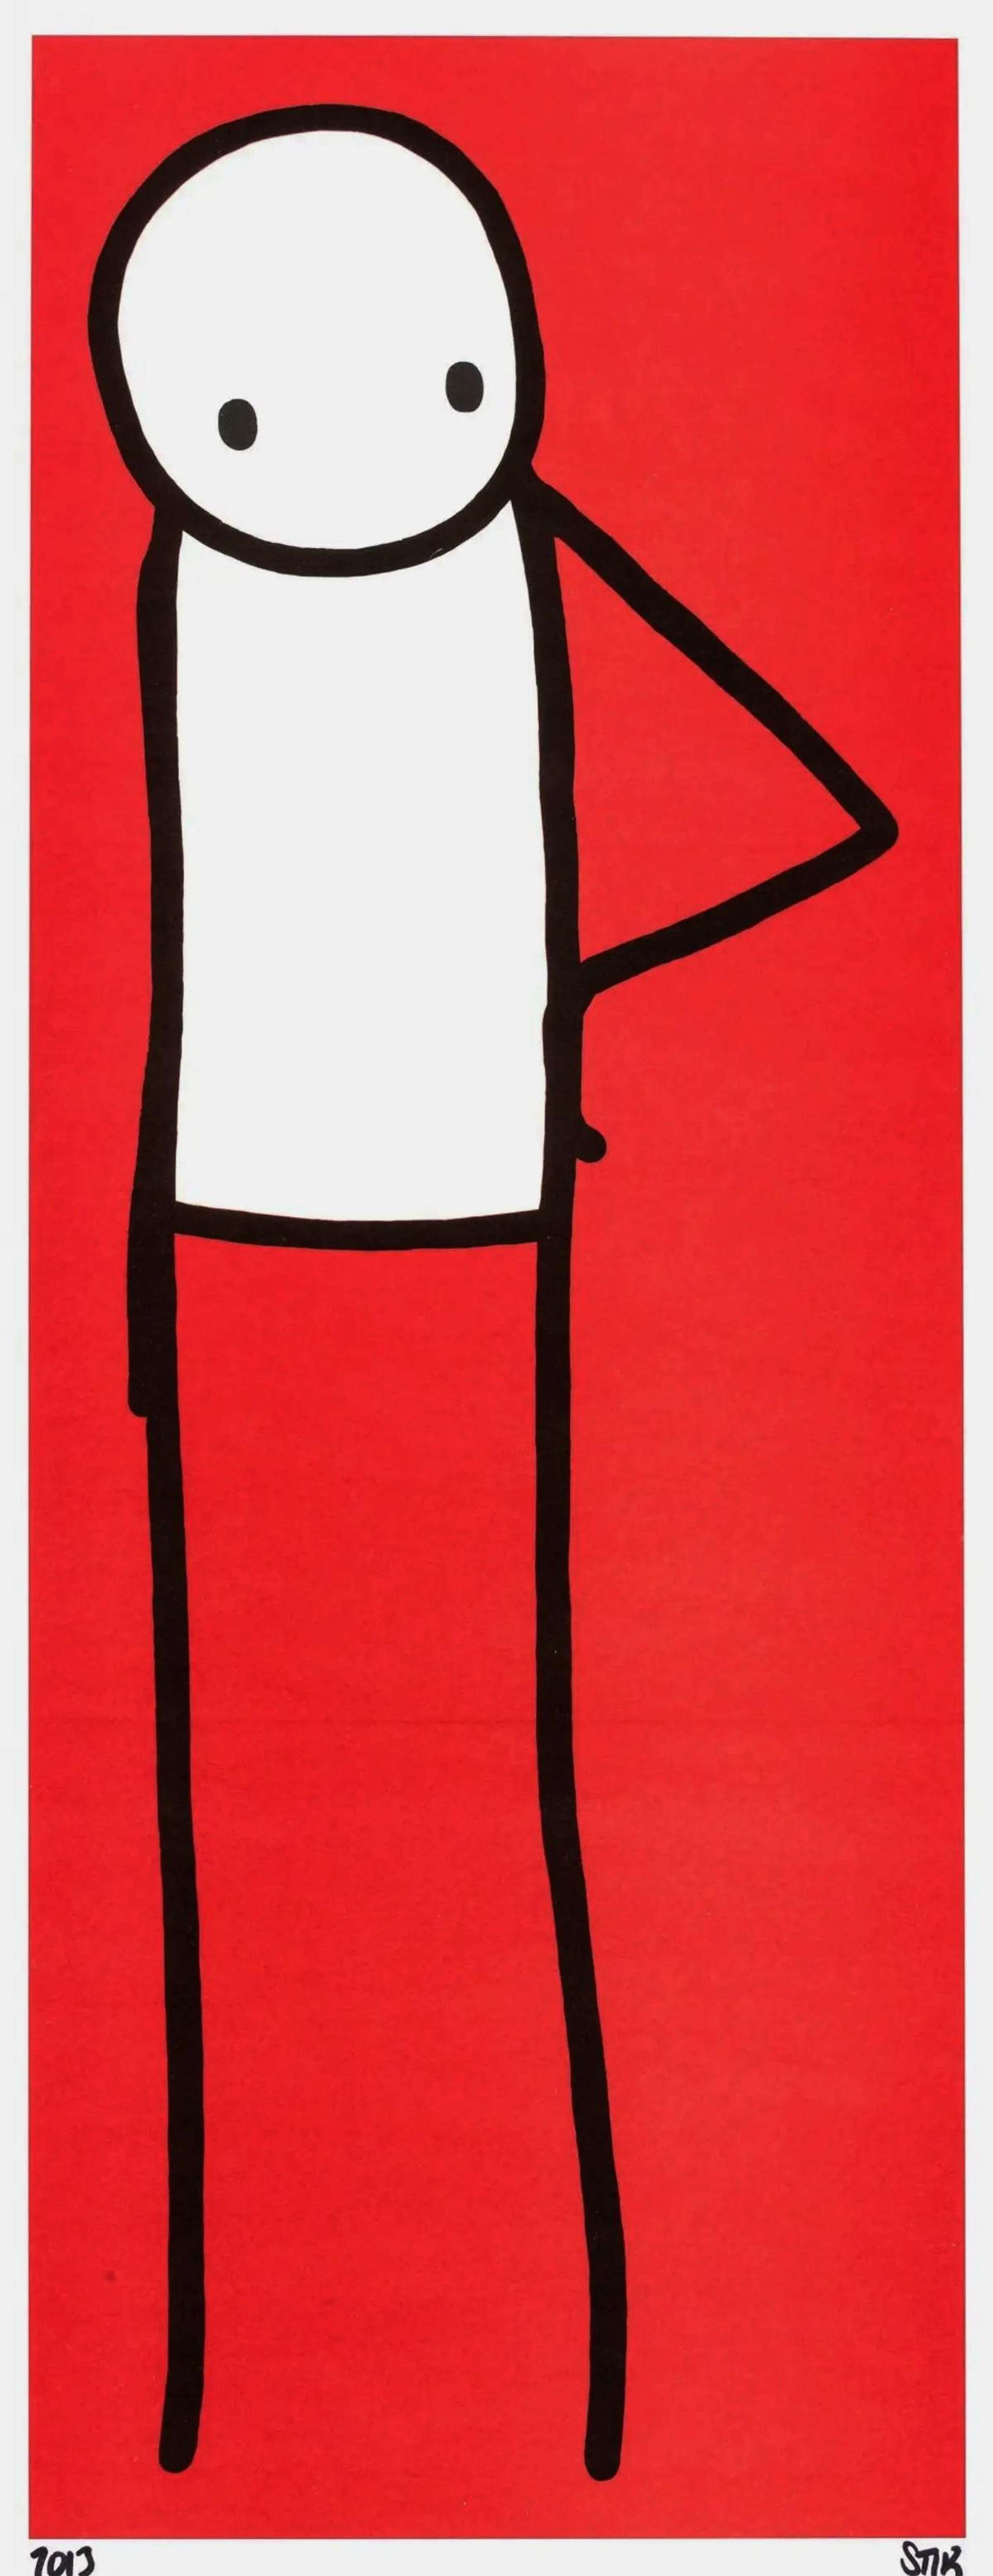 Hip (red) by Stik